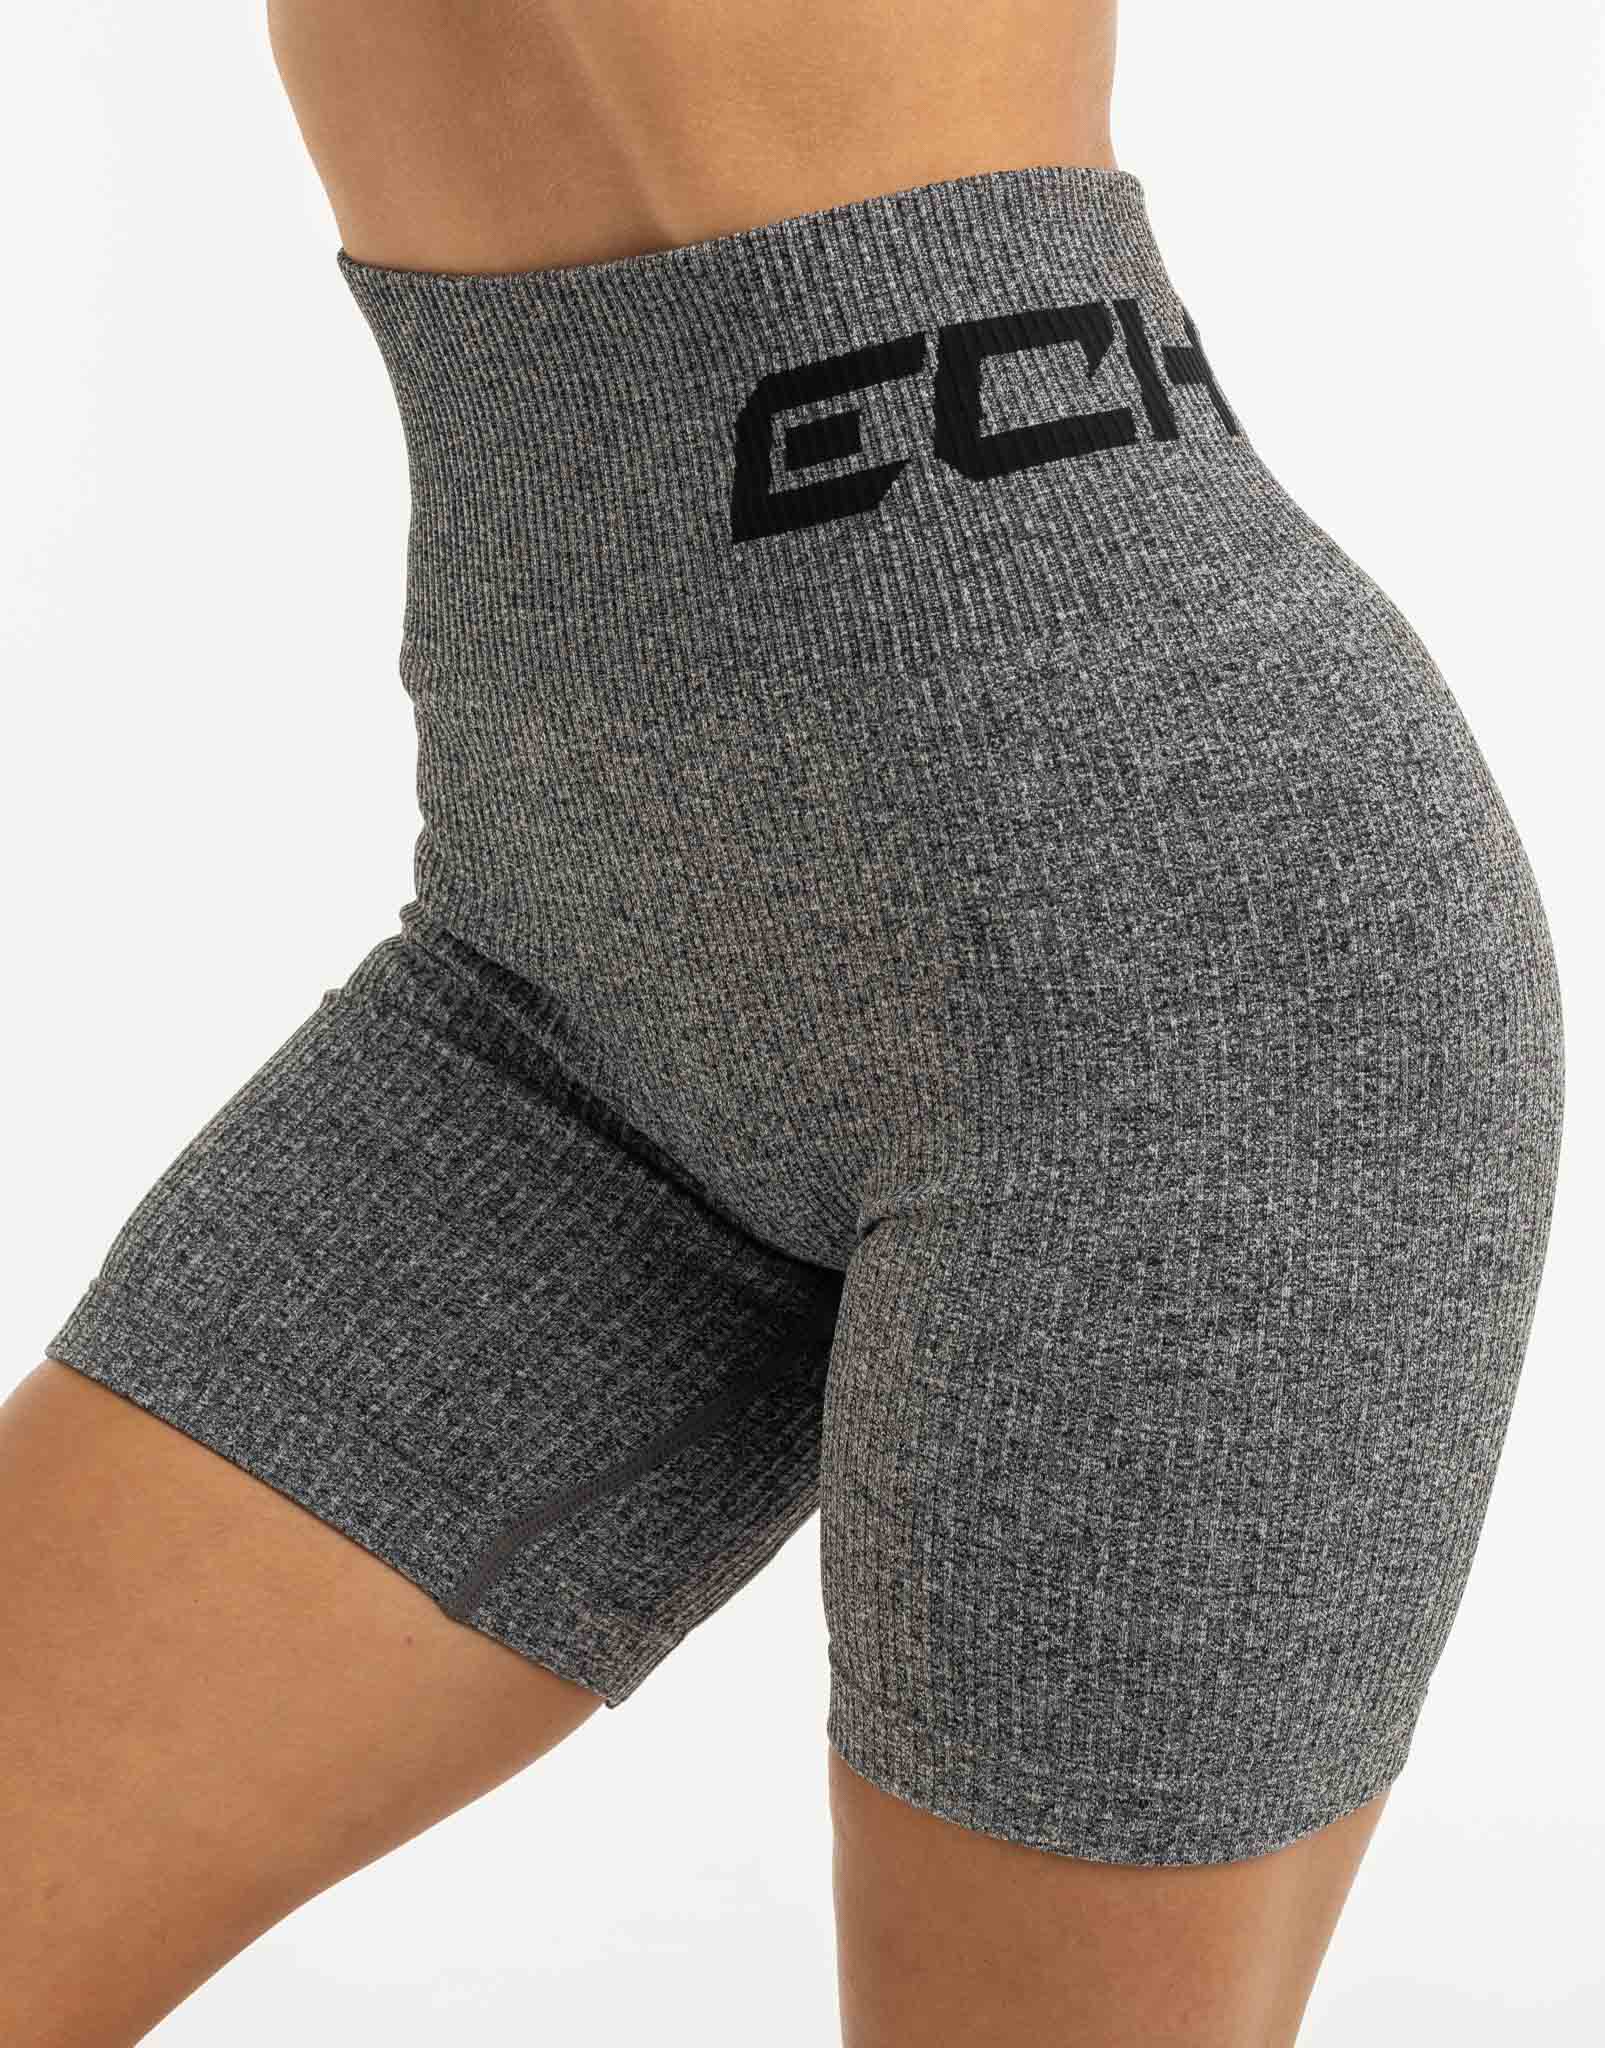 Echt - The perfect pair 😍 Arise Comfort Short Sleeves 